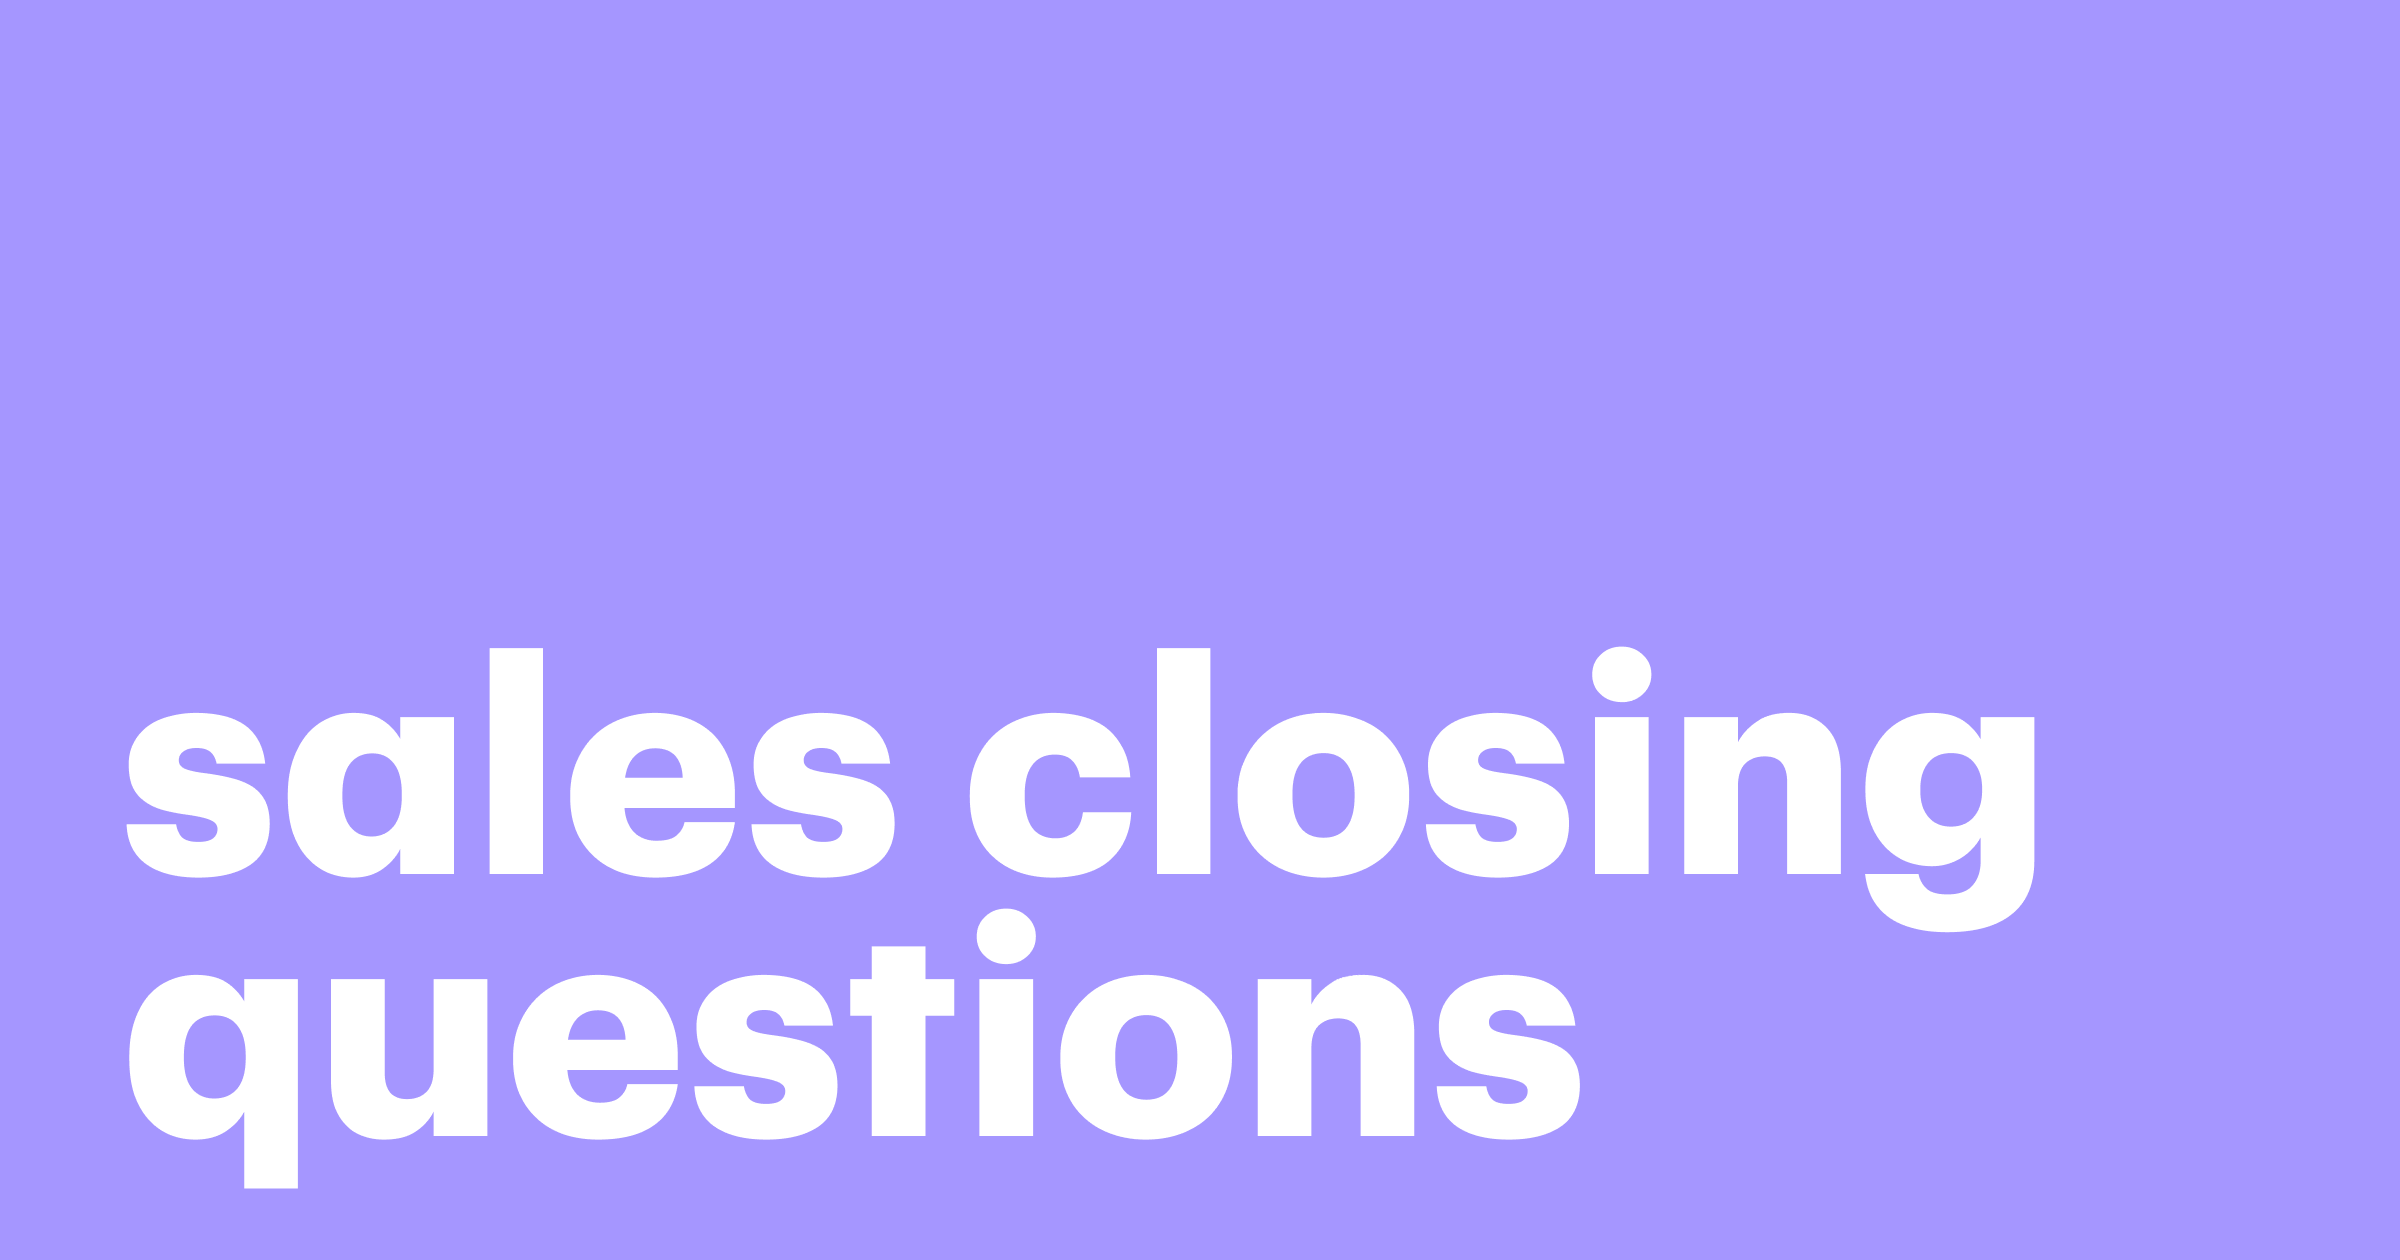 10 Sales closing questions to seal the deal